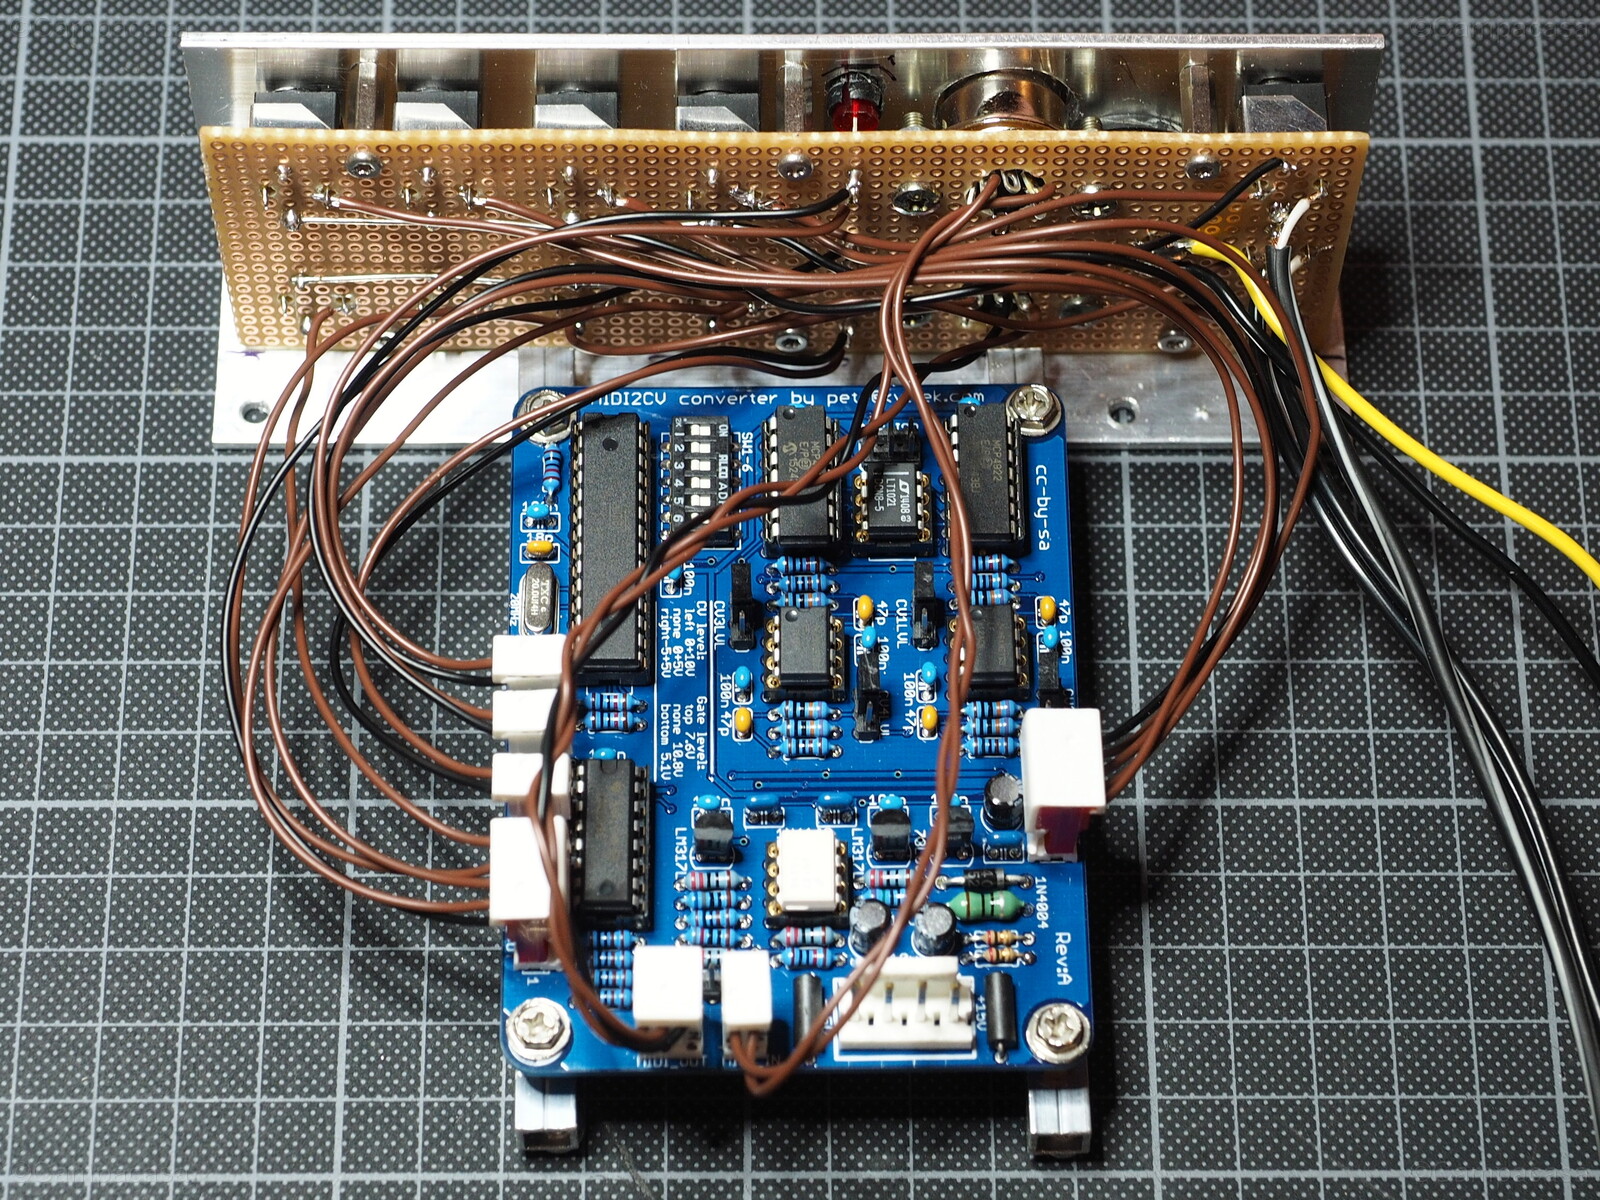 Midi2CV: PCB Mounted to Front Panel